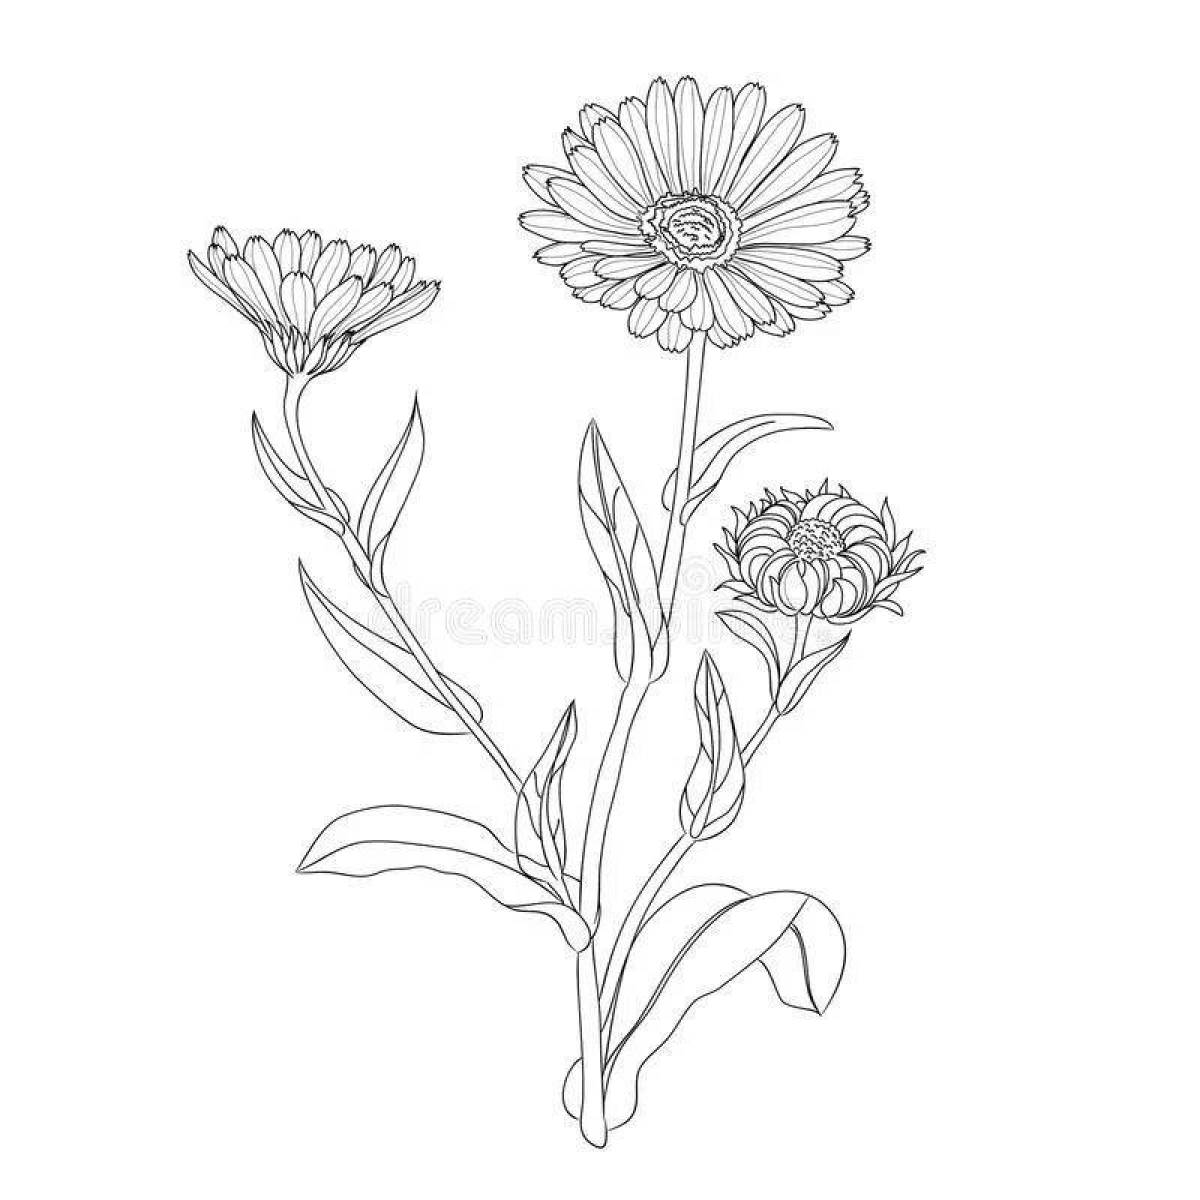 Marigold live coloring page